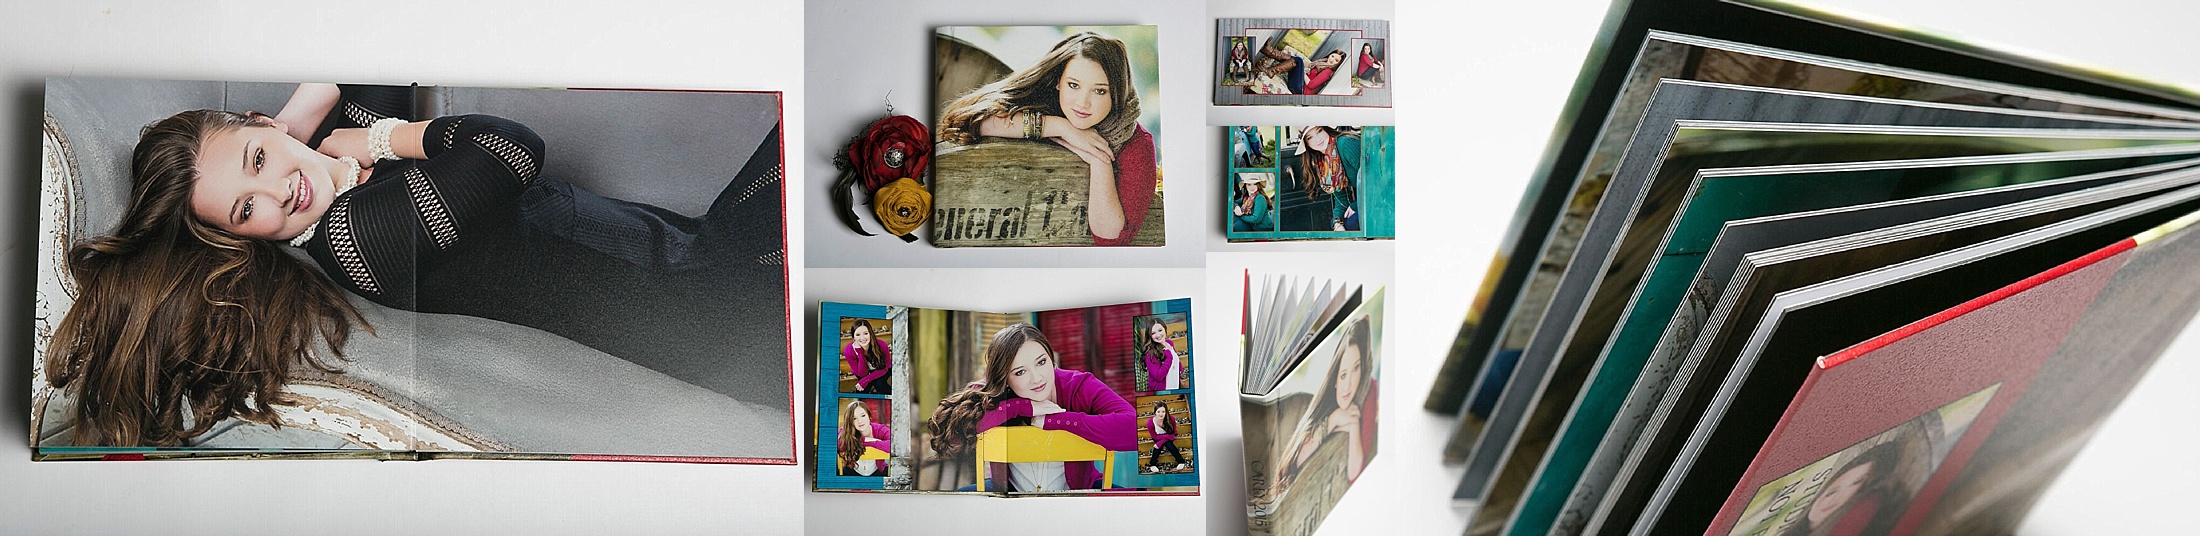 SENIOR PICTURE portrait products indianapolis Indiana MAC marci and christy coffeetable books